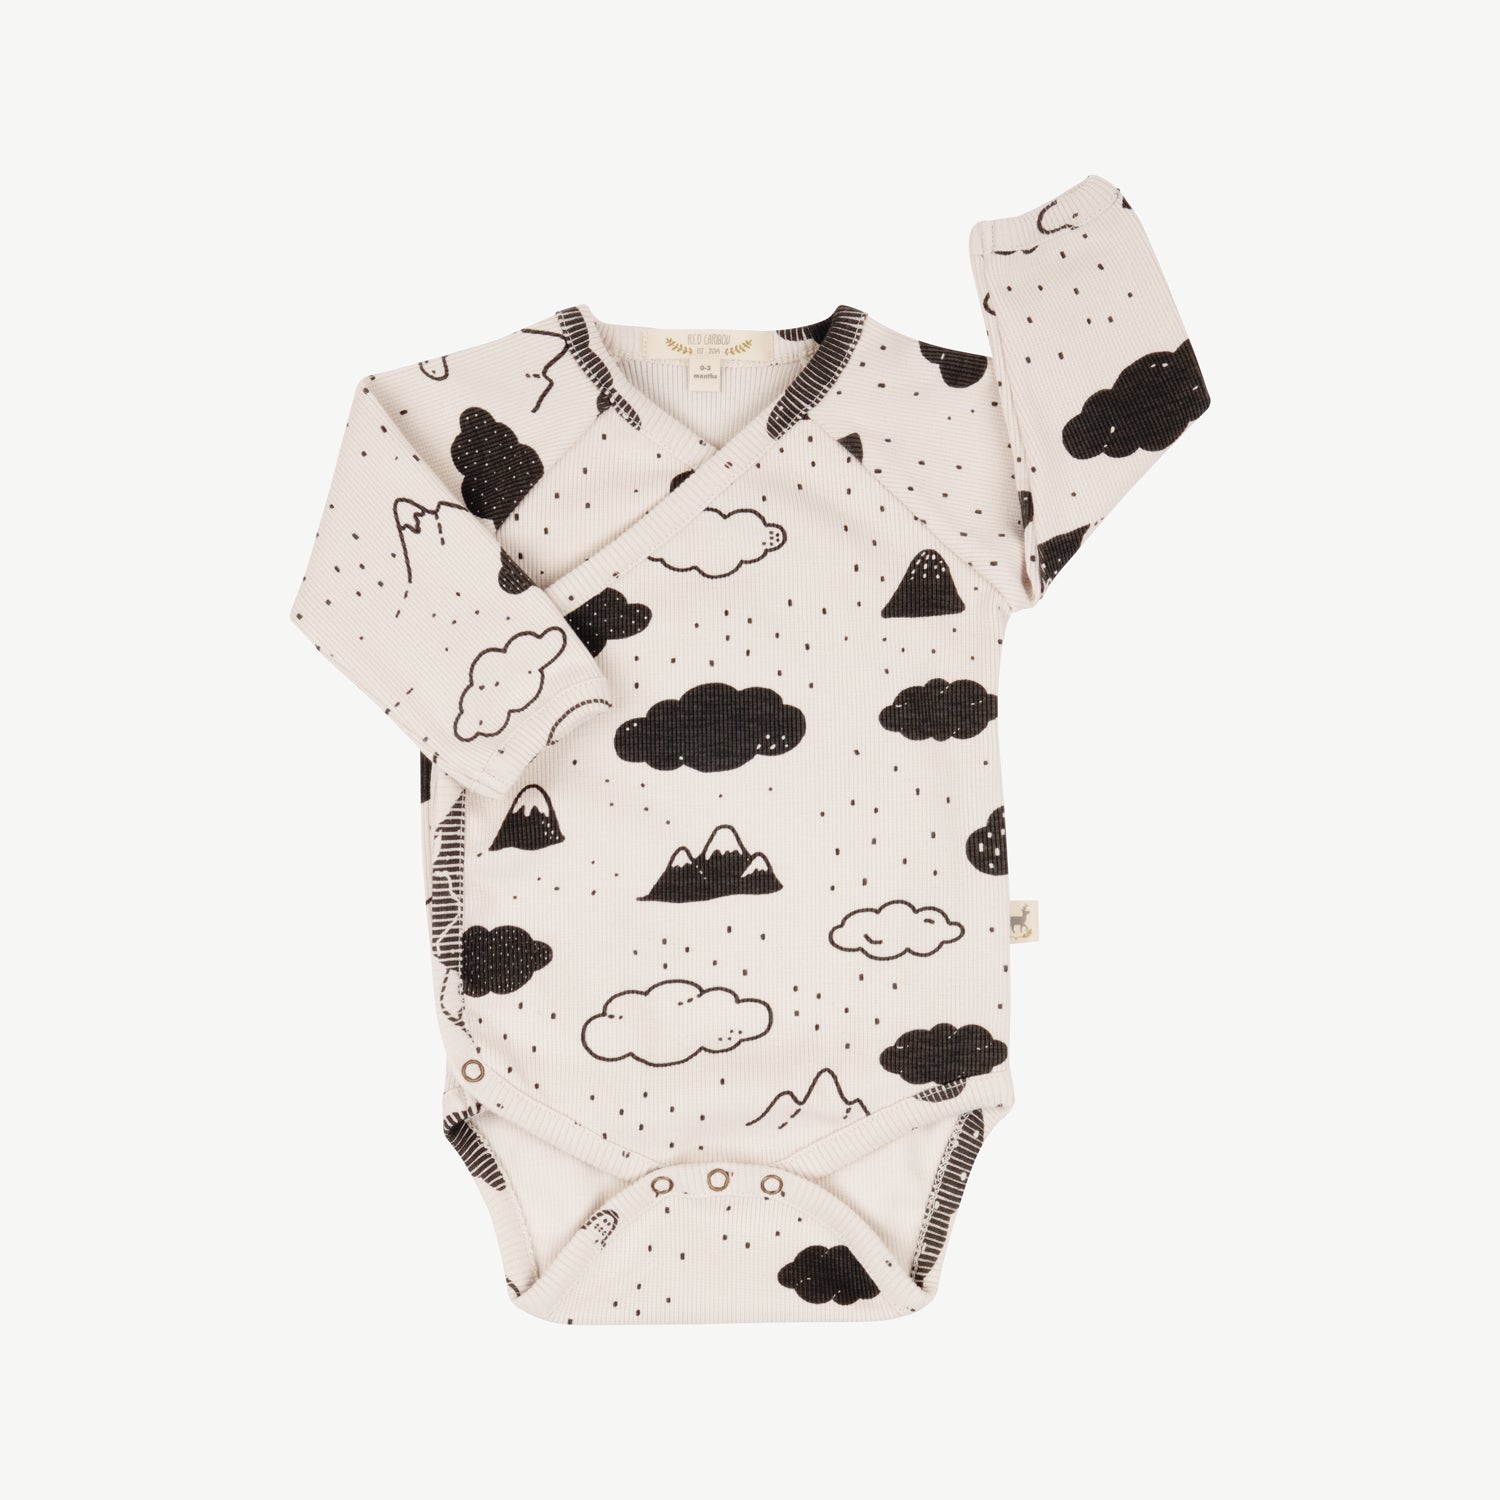 'amongst the clouds' white sand rib onesie